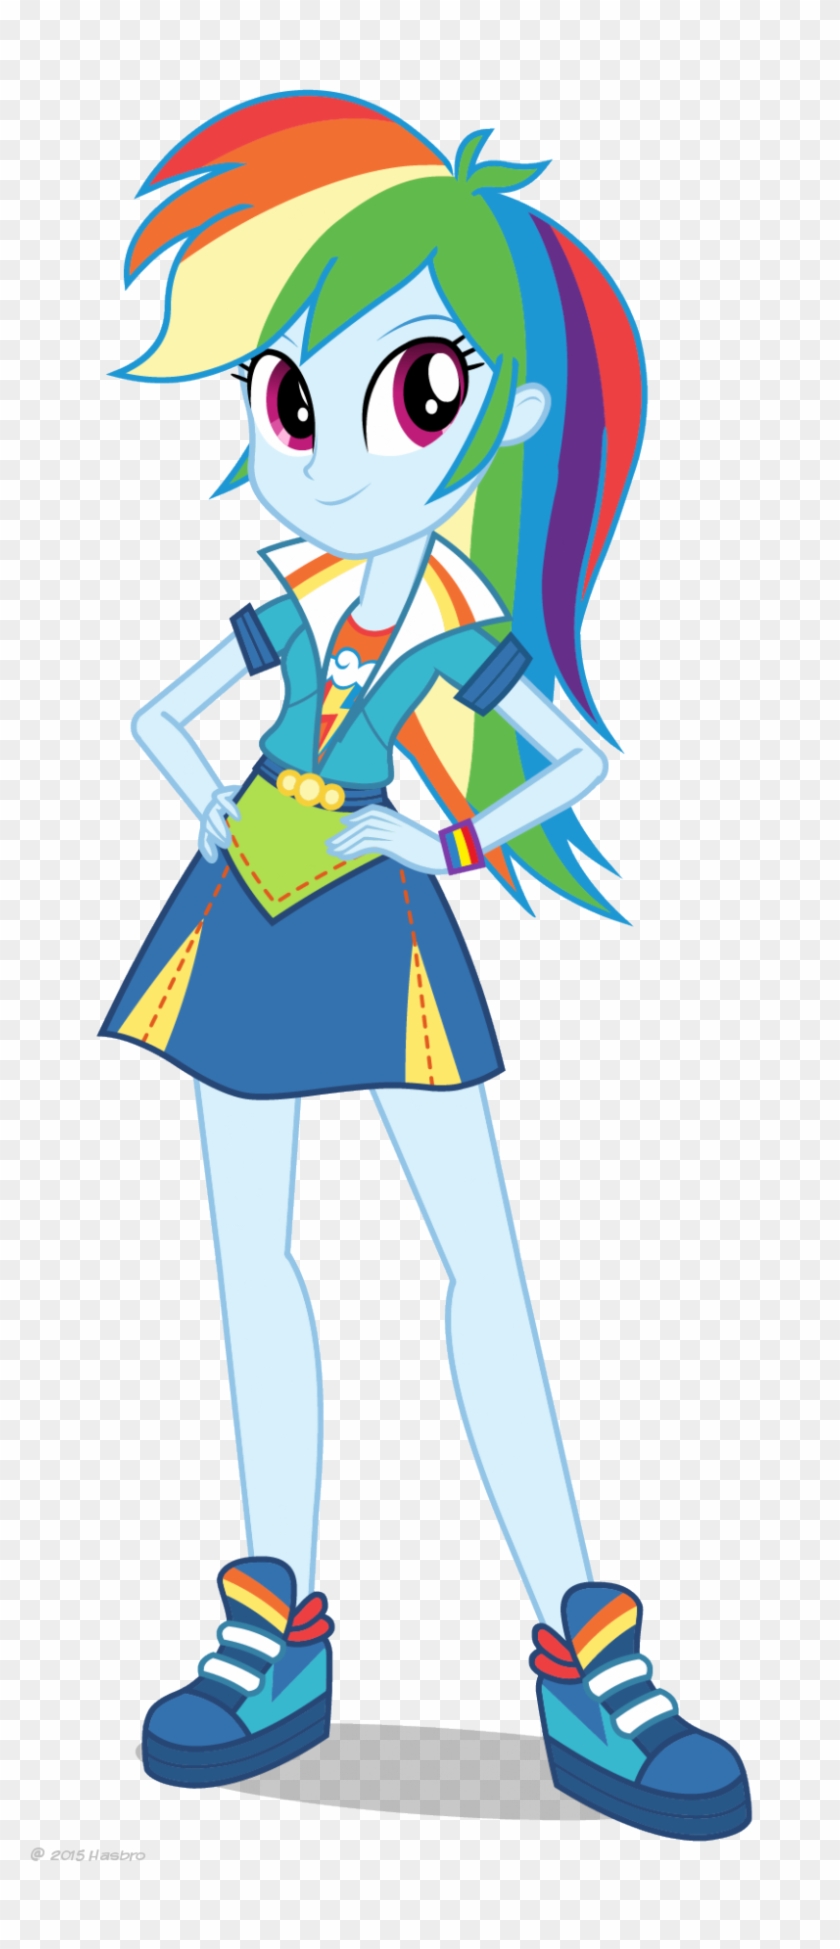 Rainbow Dash In Her Friendship Games Outfit By Superbobiann - Rainbow Dash Friendship Games #321998